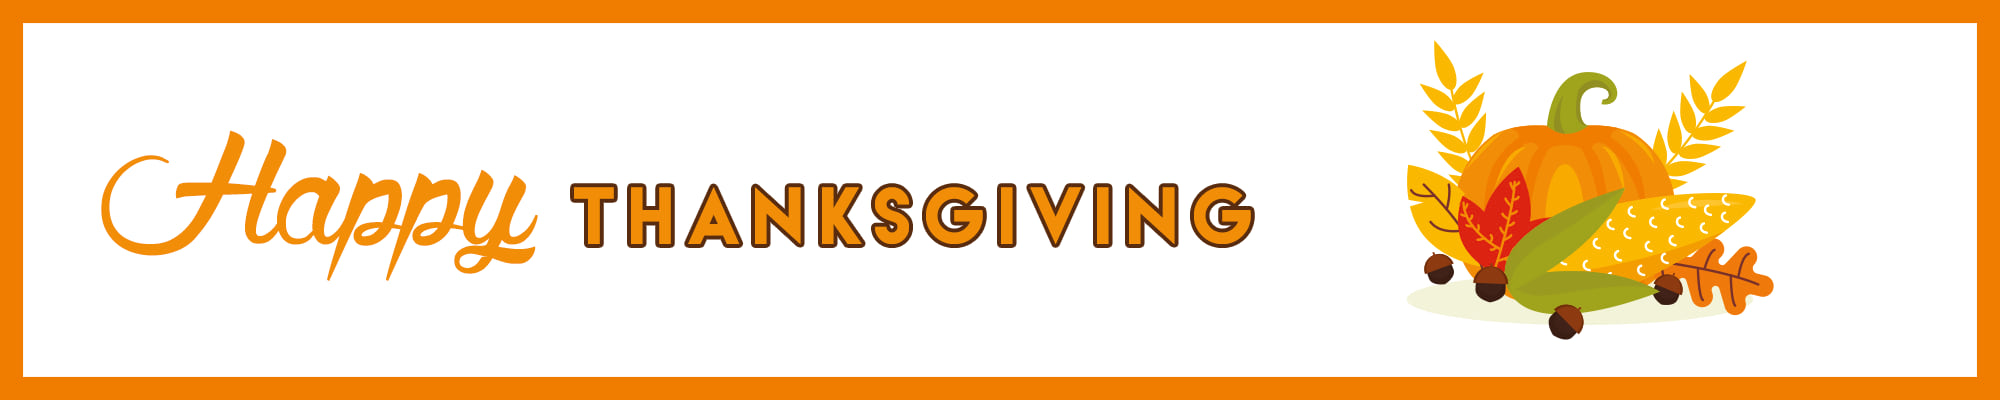 happy-thanksgiving-email-signature-banner-examples-send-greeting-on